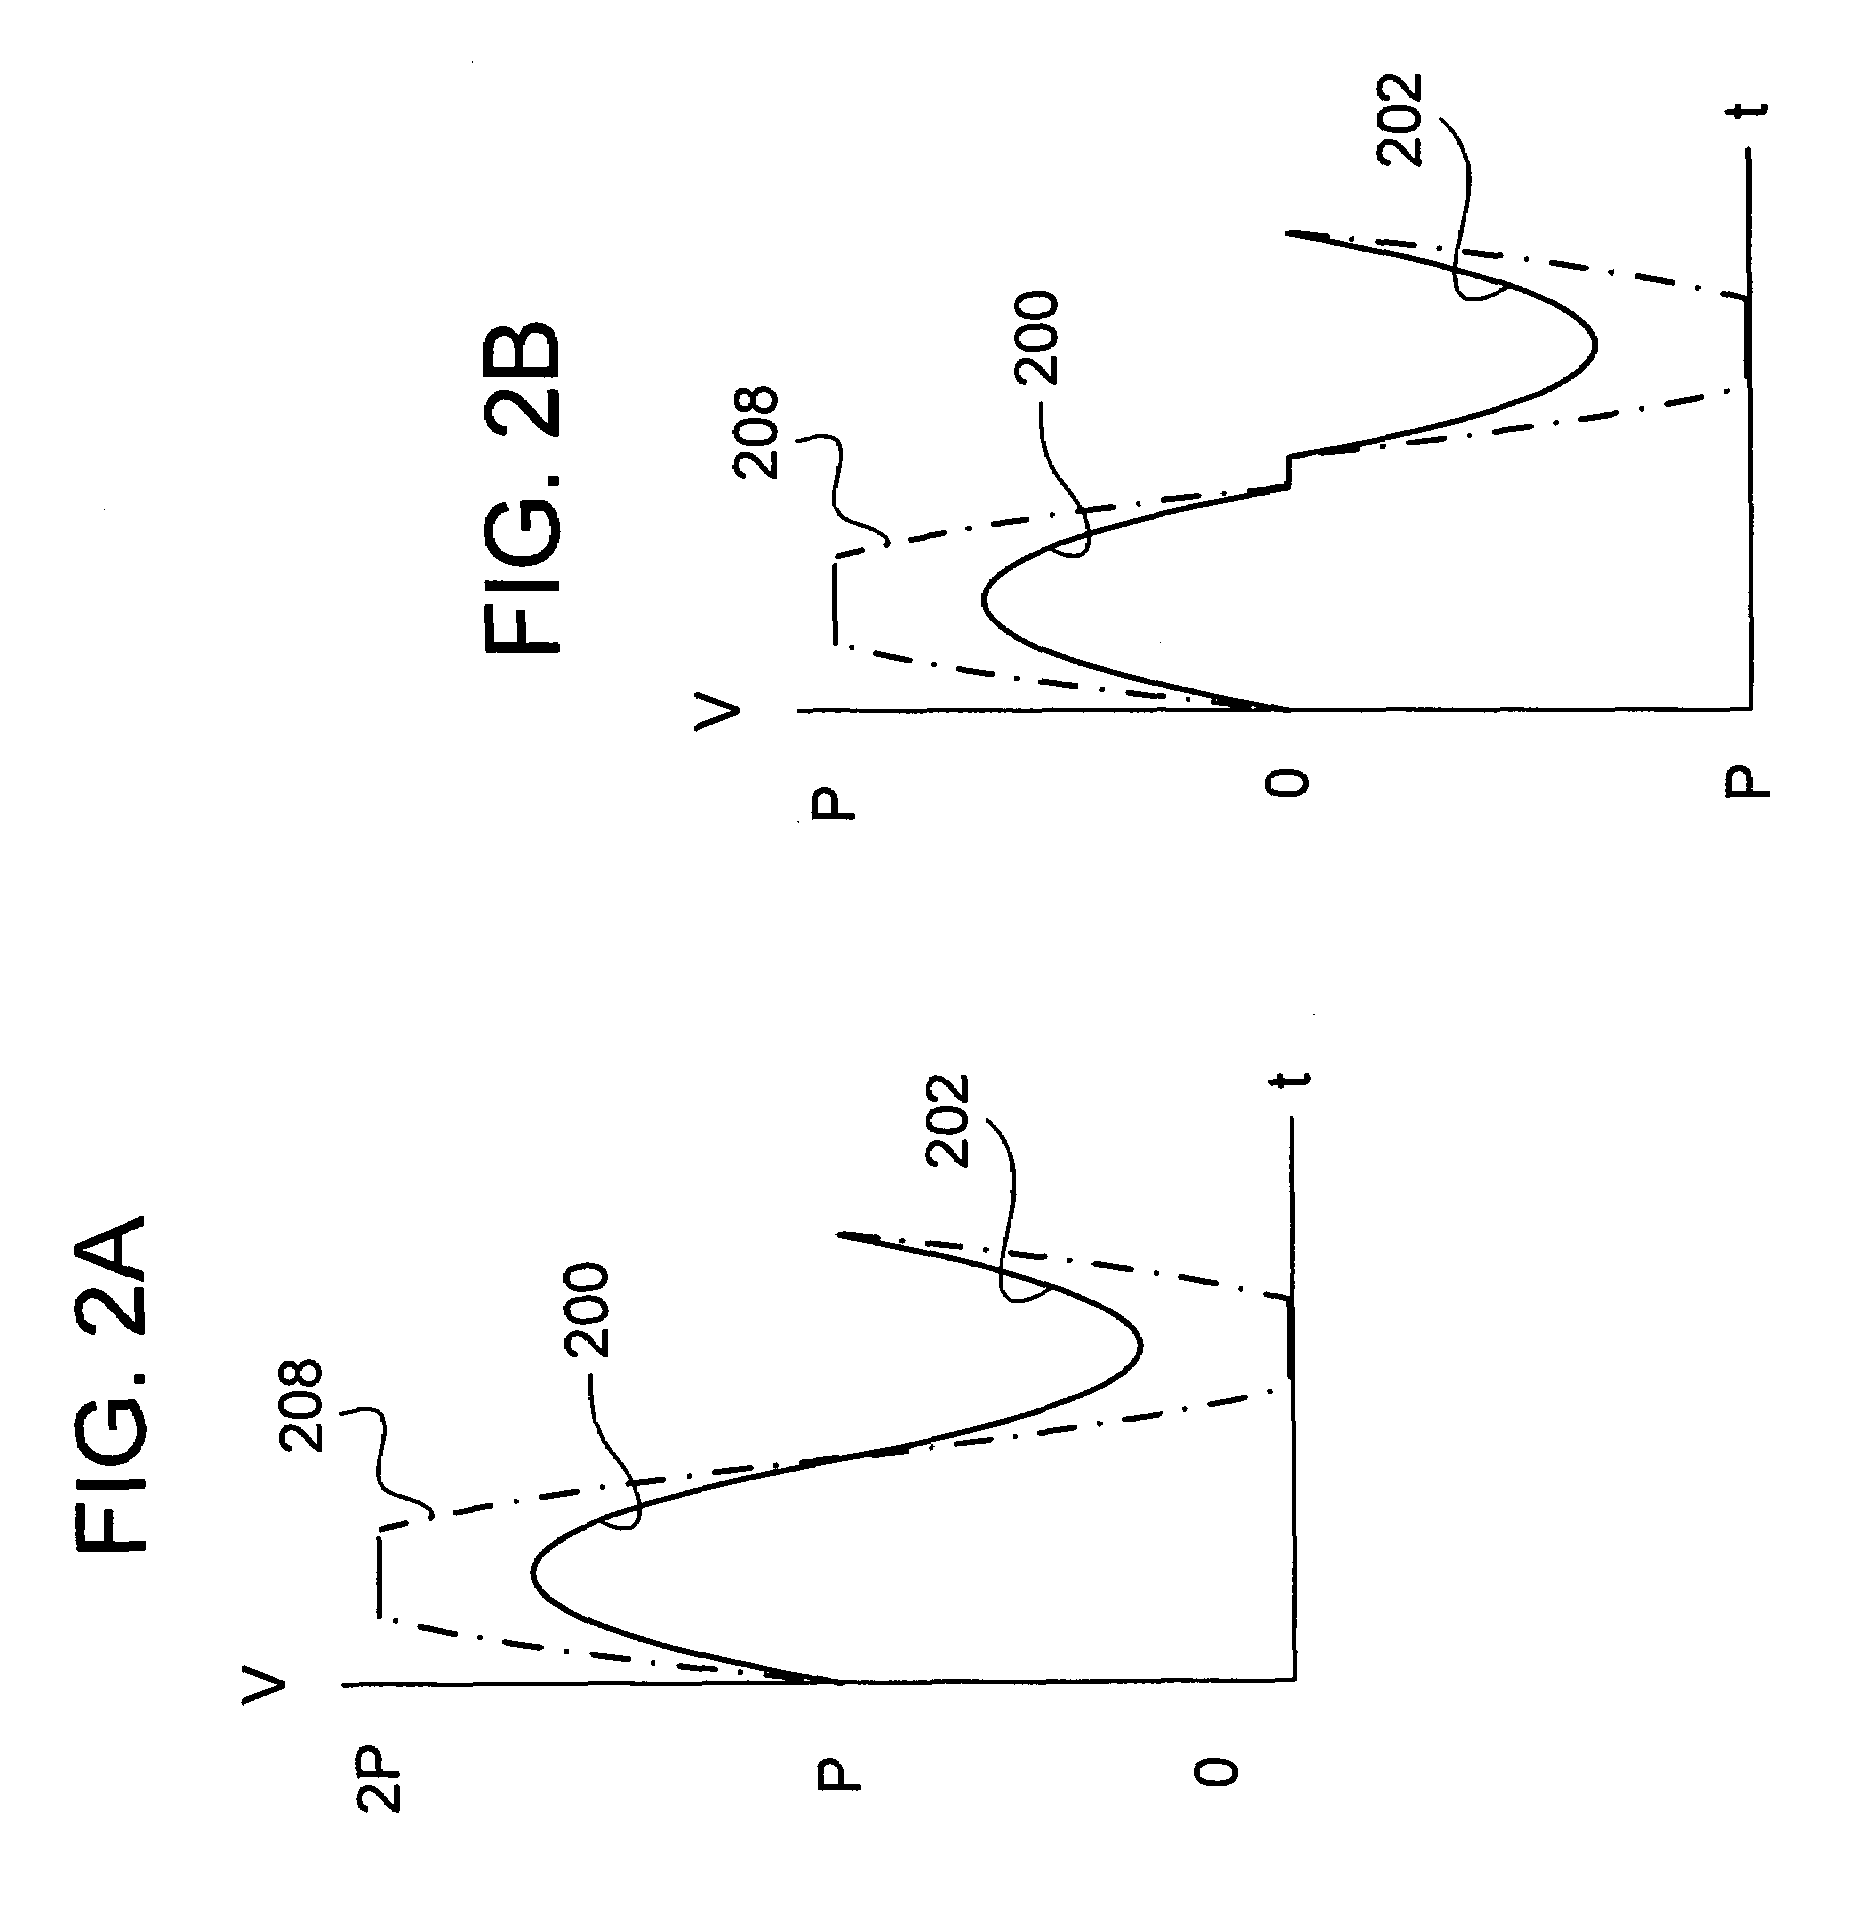 Methods and apparatus for switching between class A and A/B operation in a power amplifier